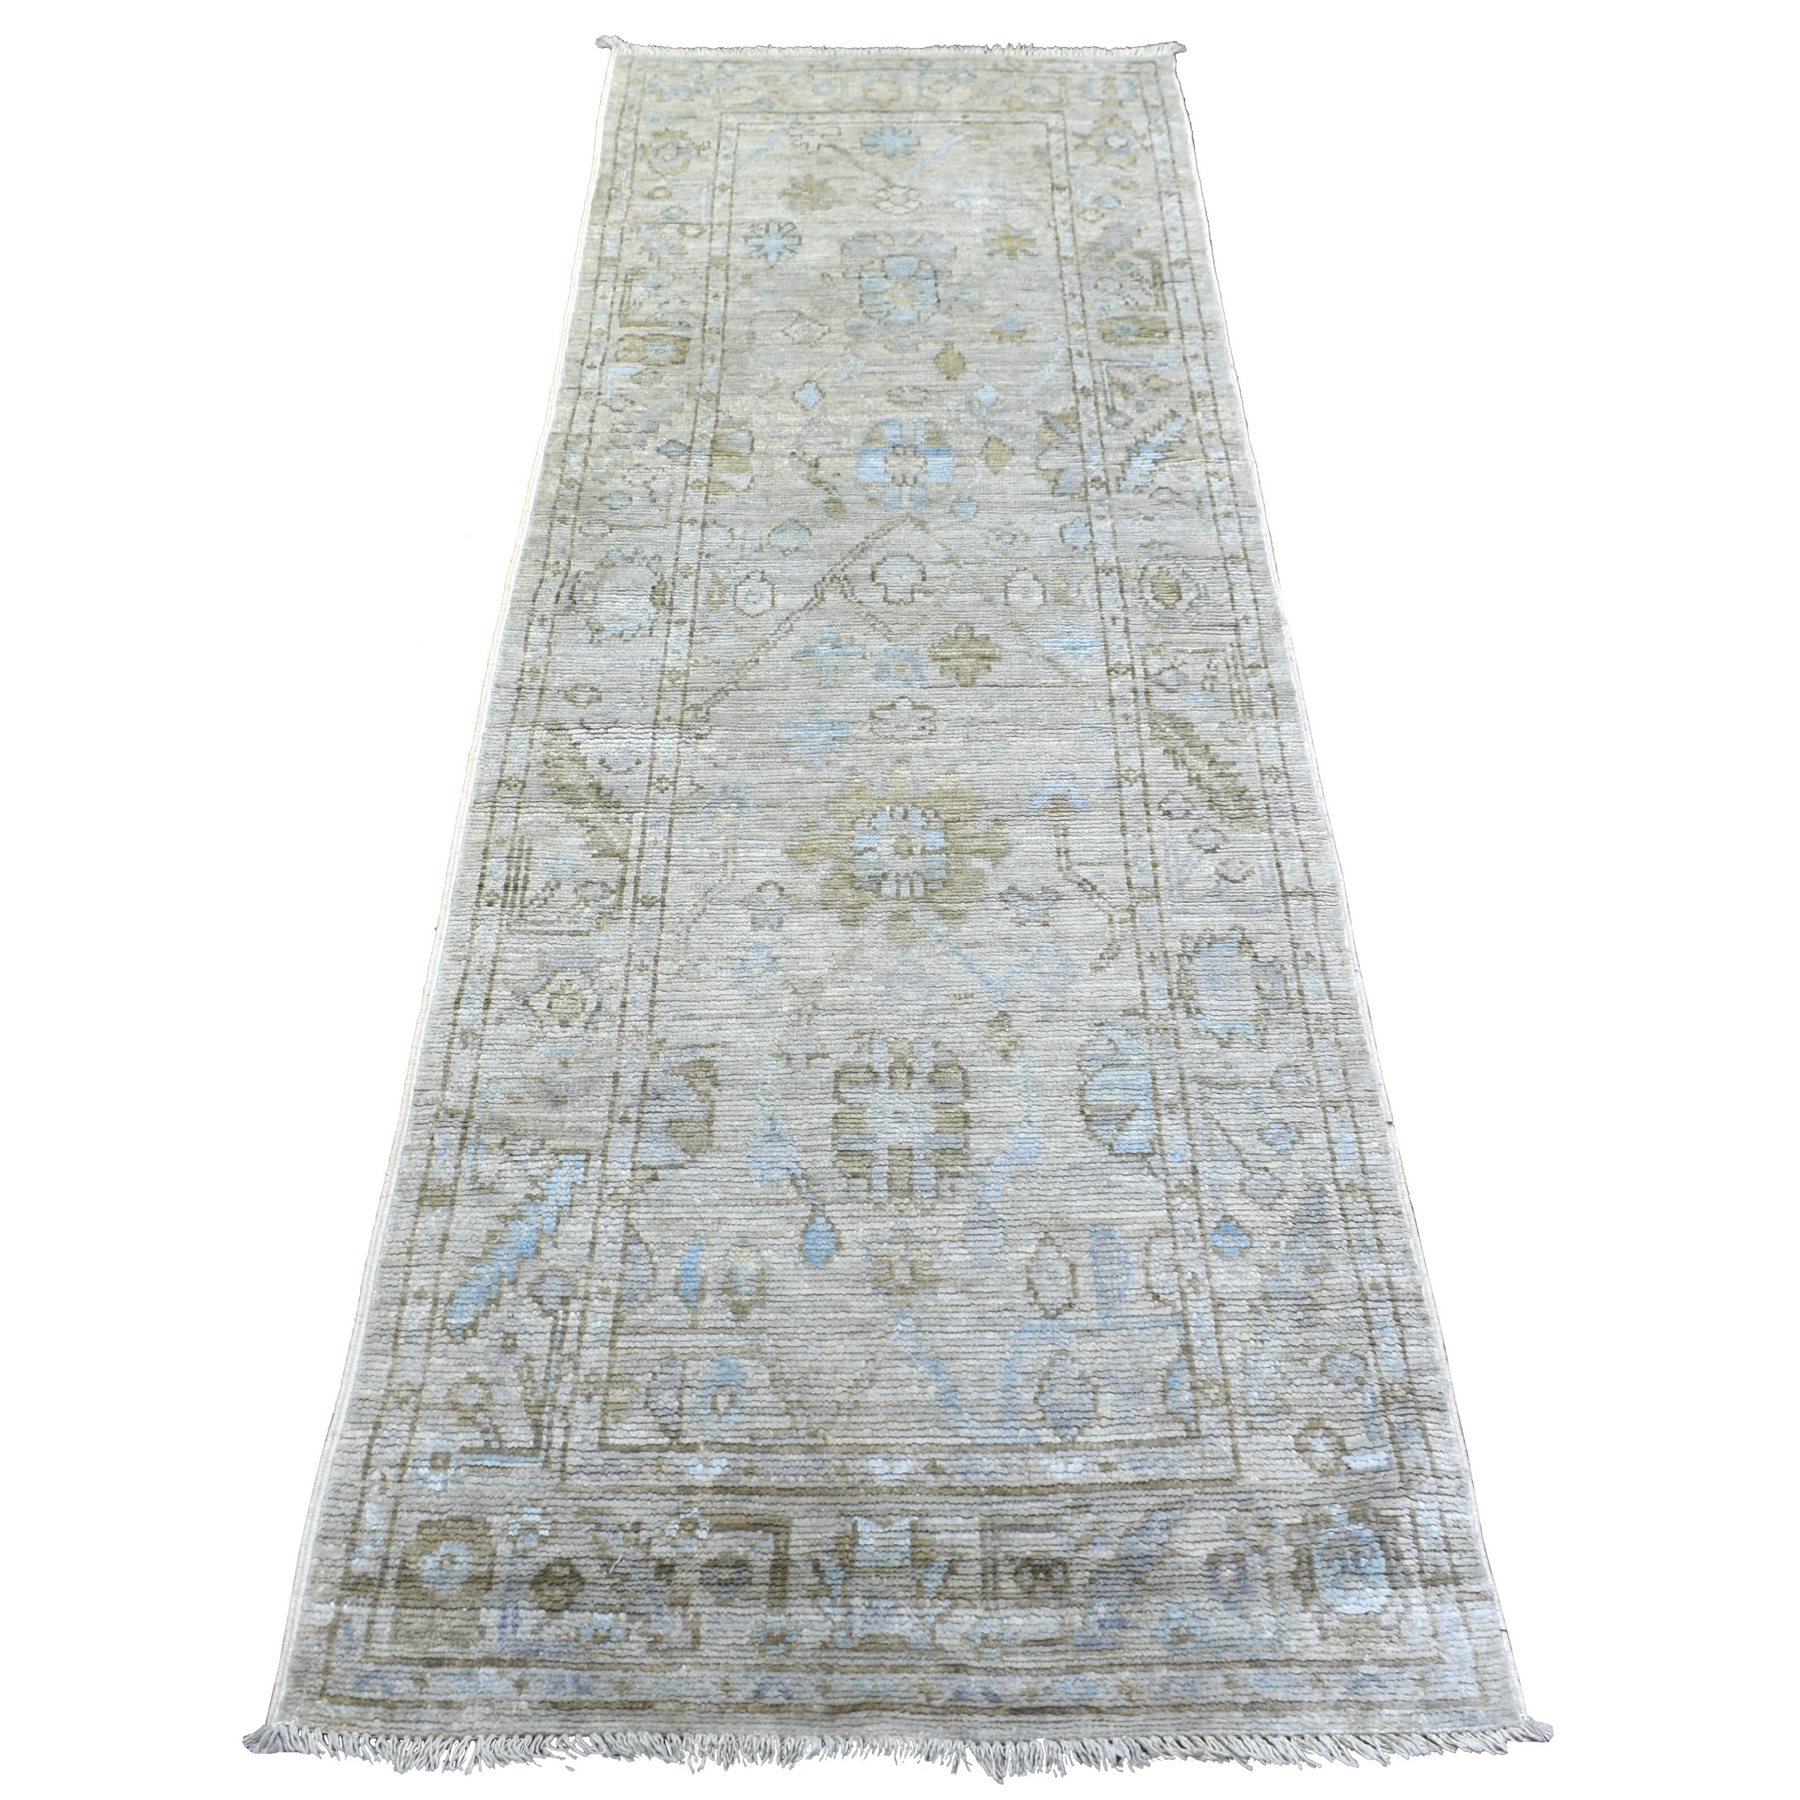 2'7"x7'9" Gray Angora Oushak Soft Colors With Leaf Design Natural Dyes, Afghan Wool Hand Woven Runner Oriental Rug 